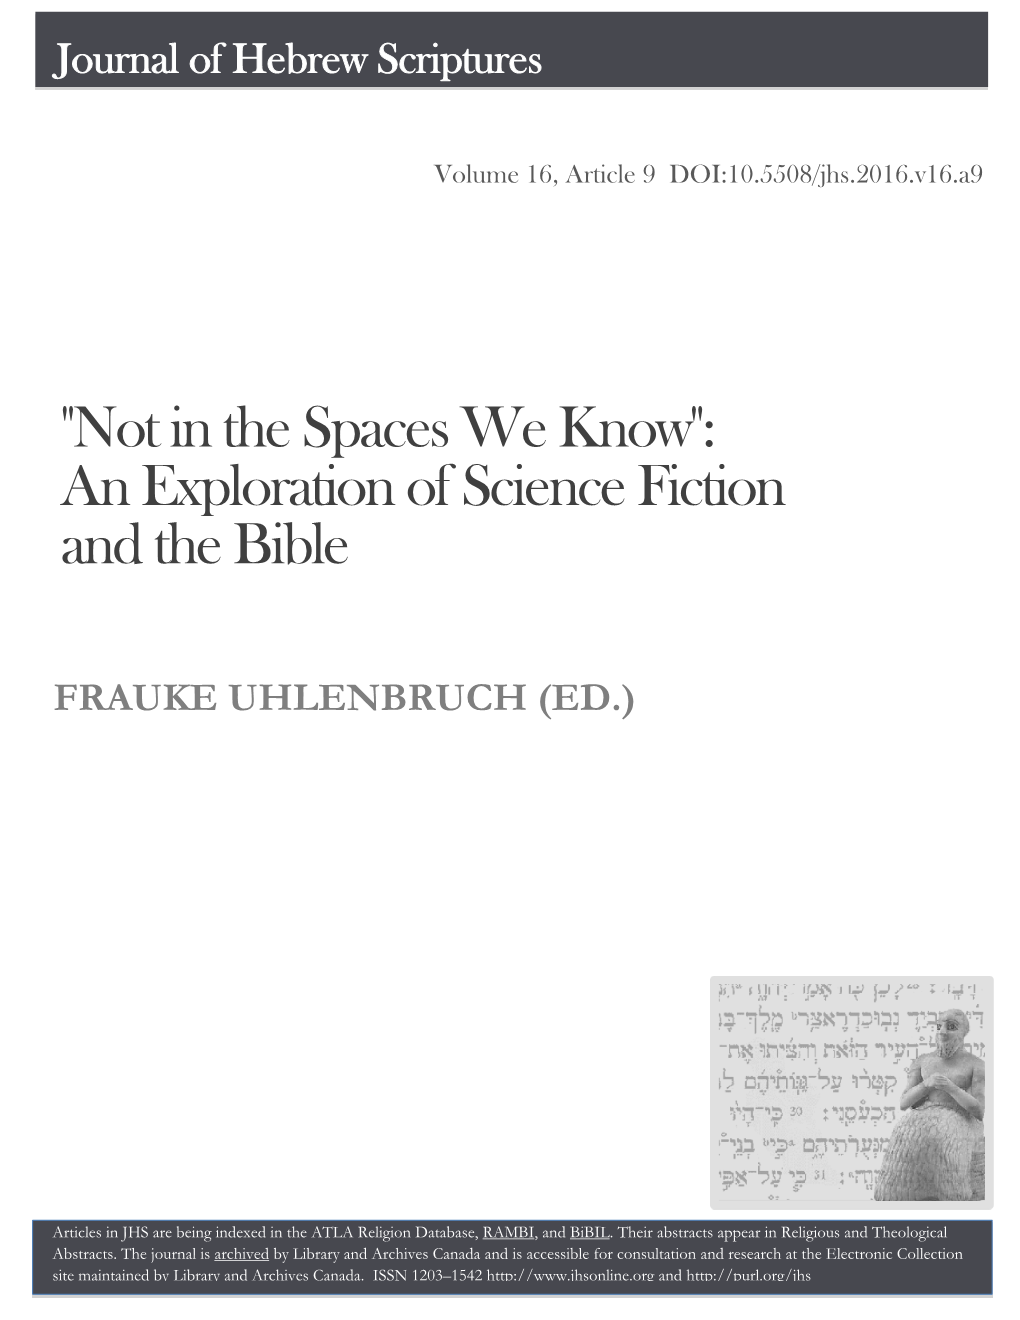 An Exploration of Science Fiction and the Bible